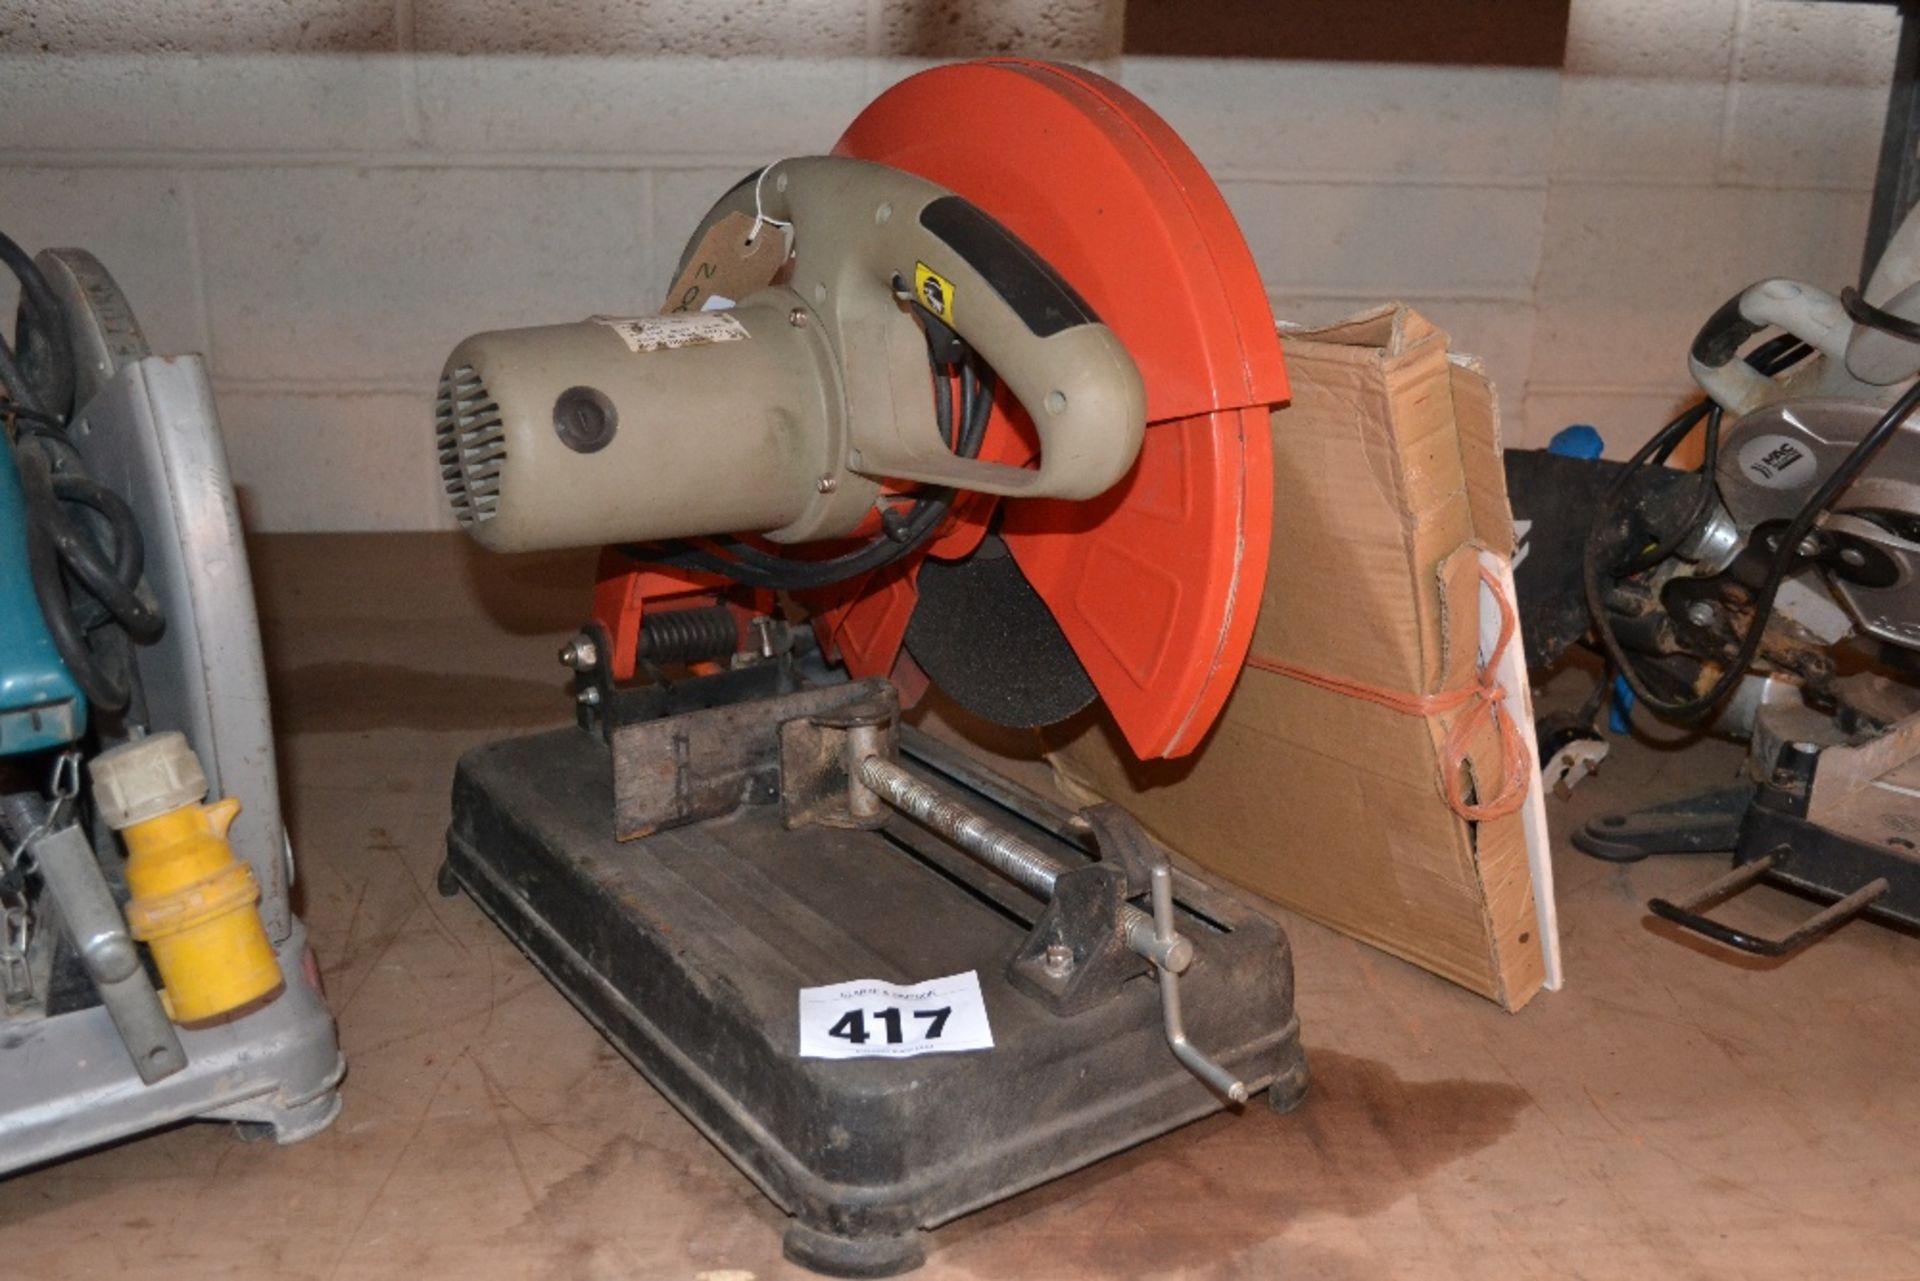 SIP 14" abrasive cut off saw. With 10 metal cutting discs.